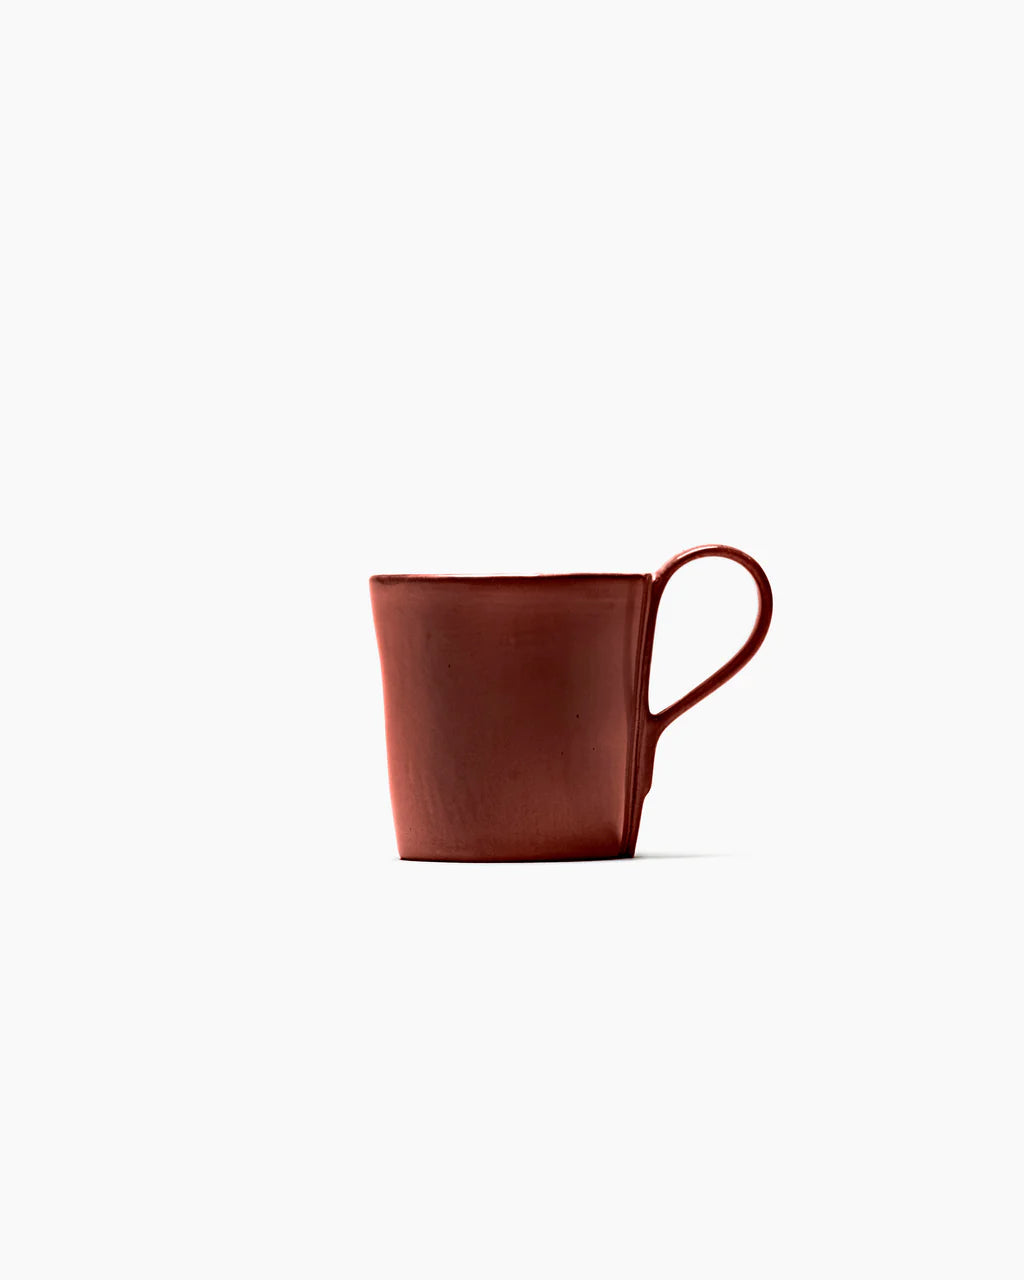 Venetian Red Coffee Cup with a Handle